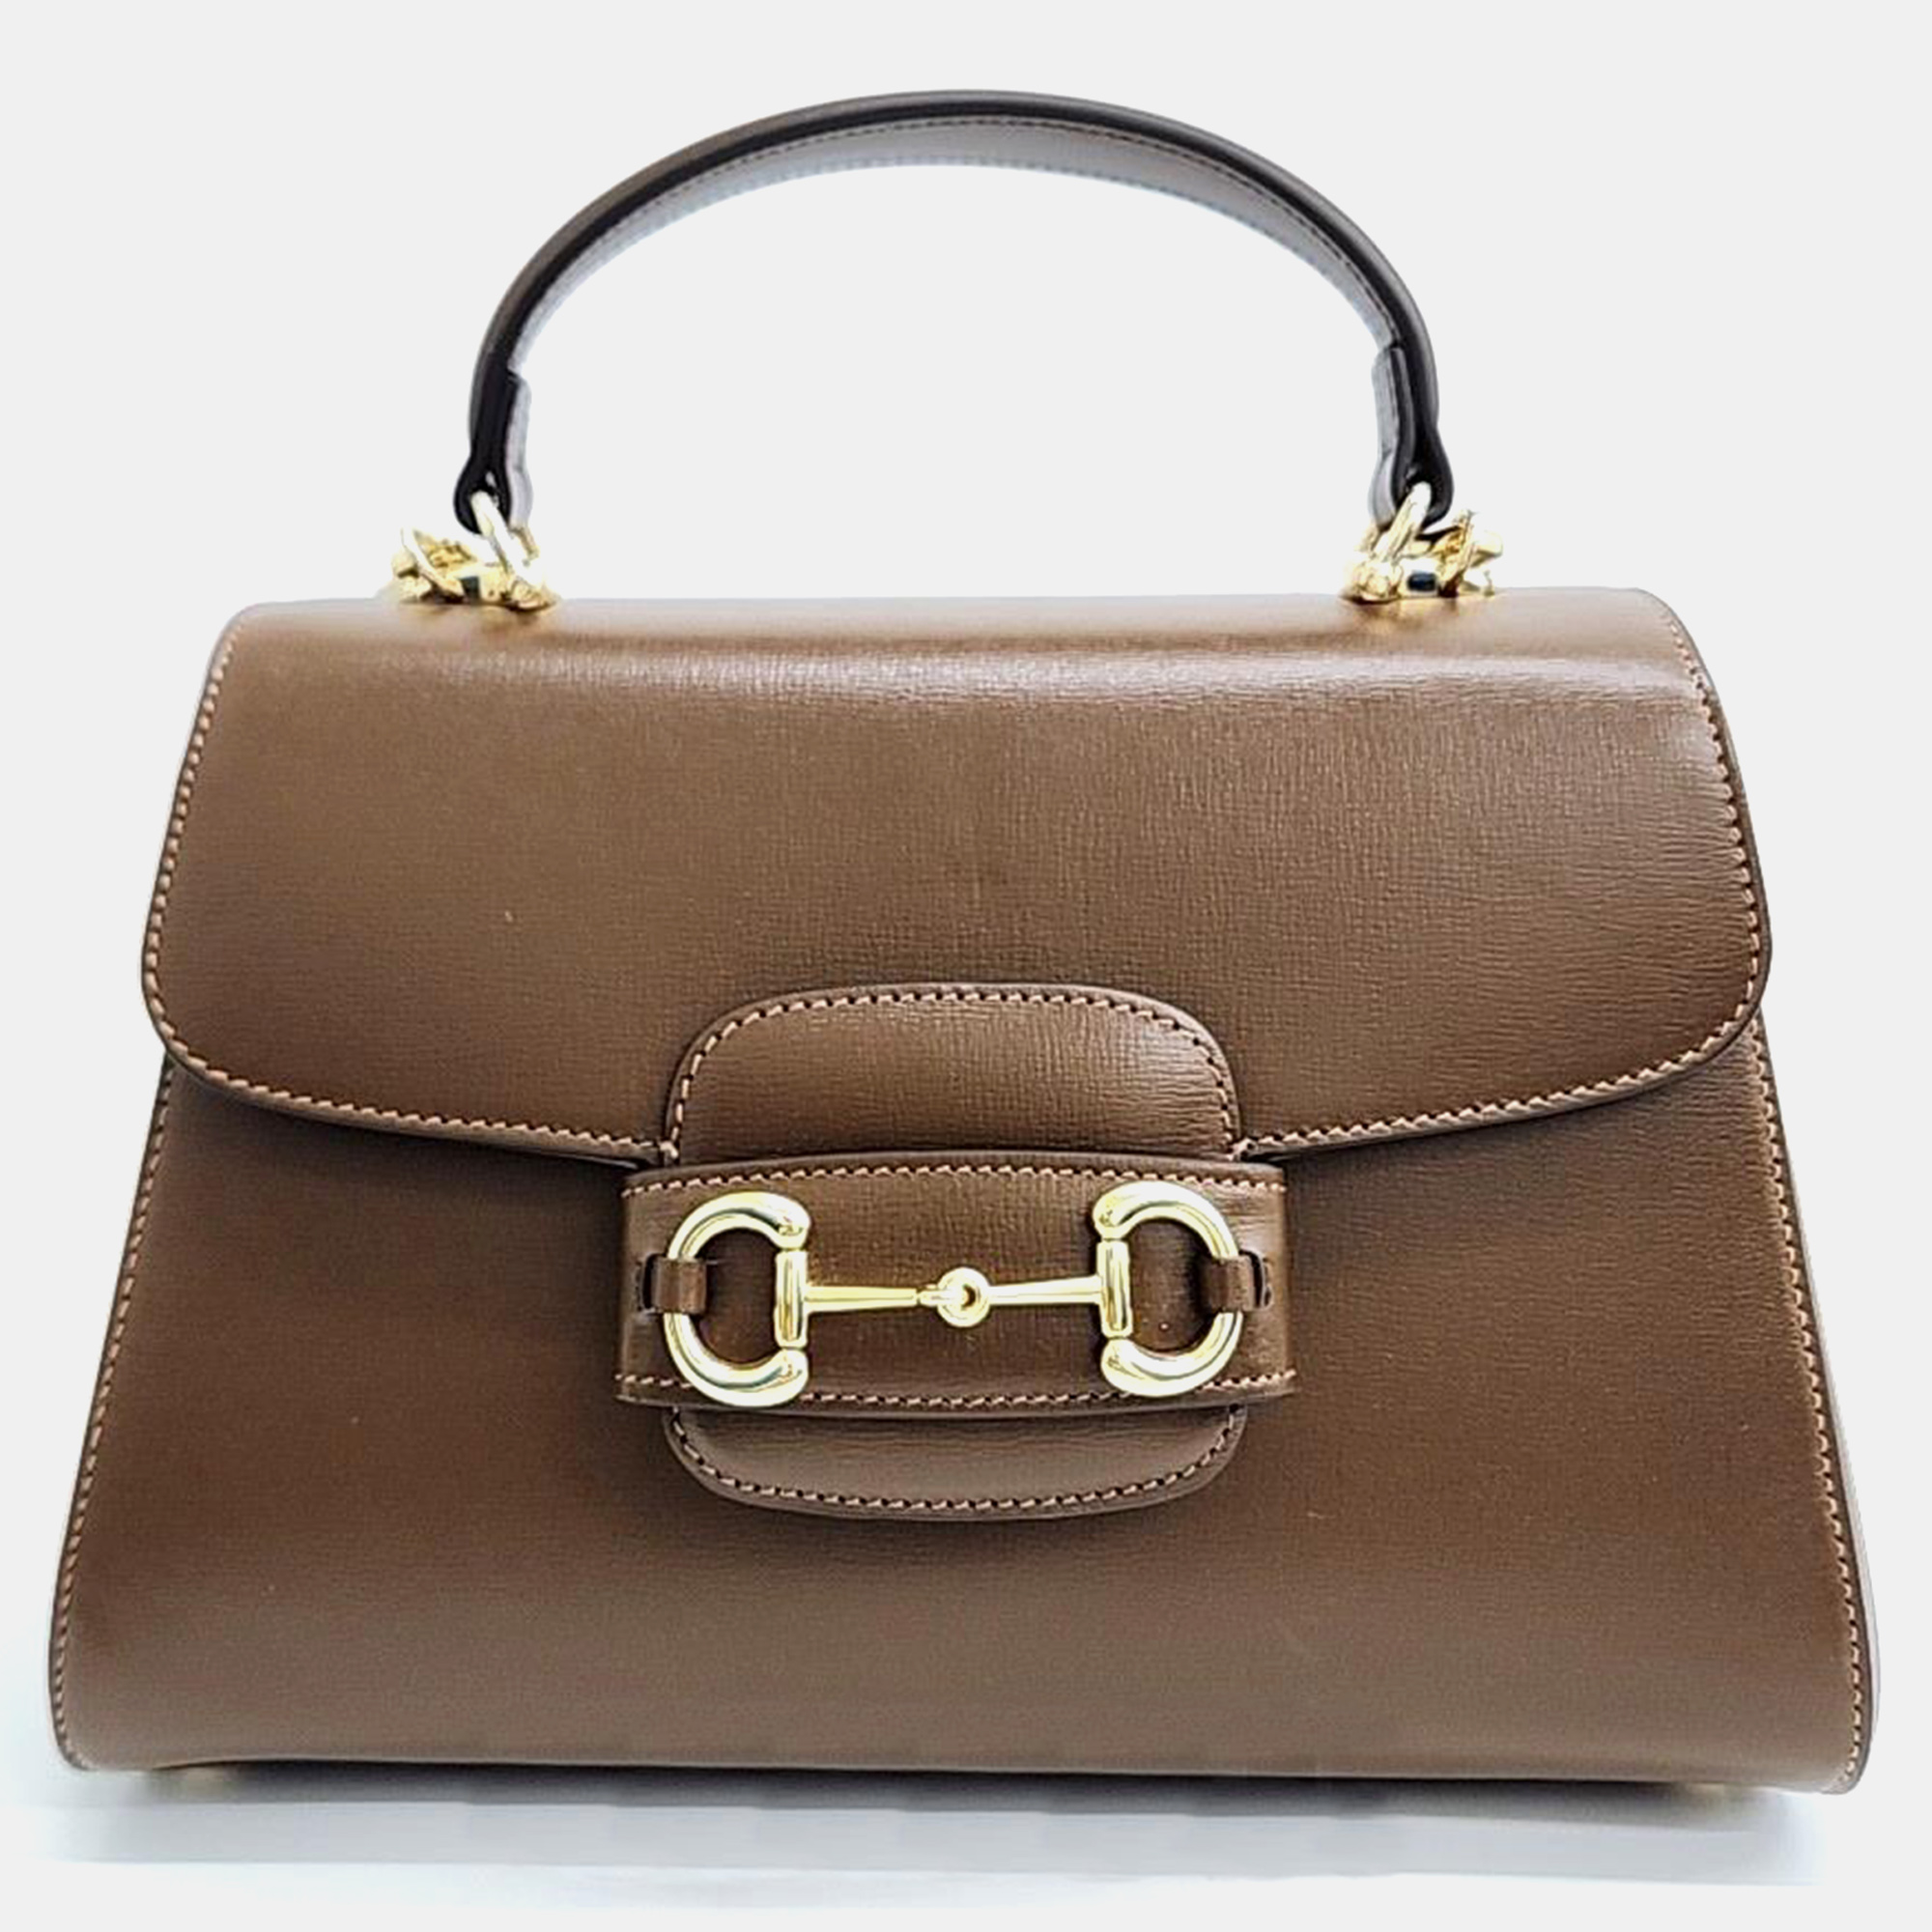 Gucci brown leather horsebit 1955 tote and shoulder bag